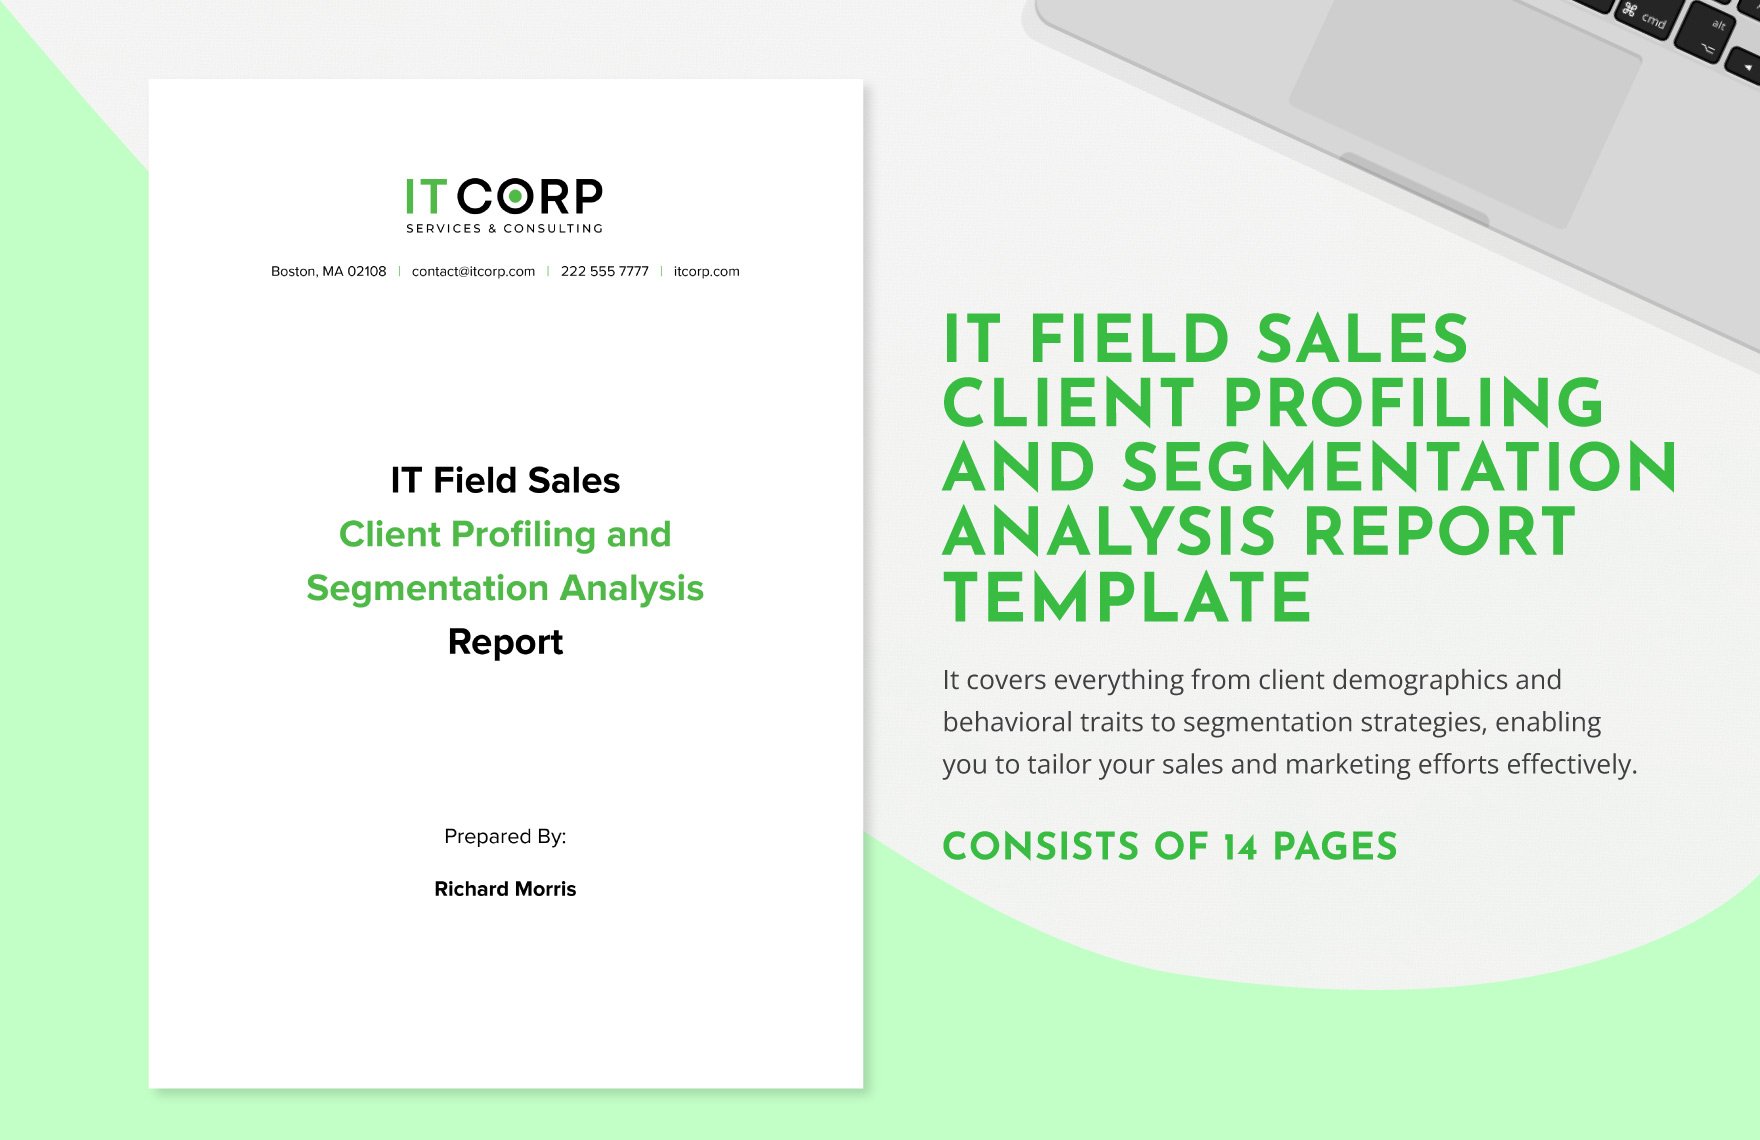 IT Field Sales Client Profiling and Segmentation Analysis Report Template